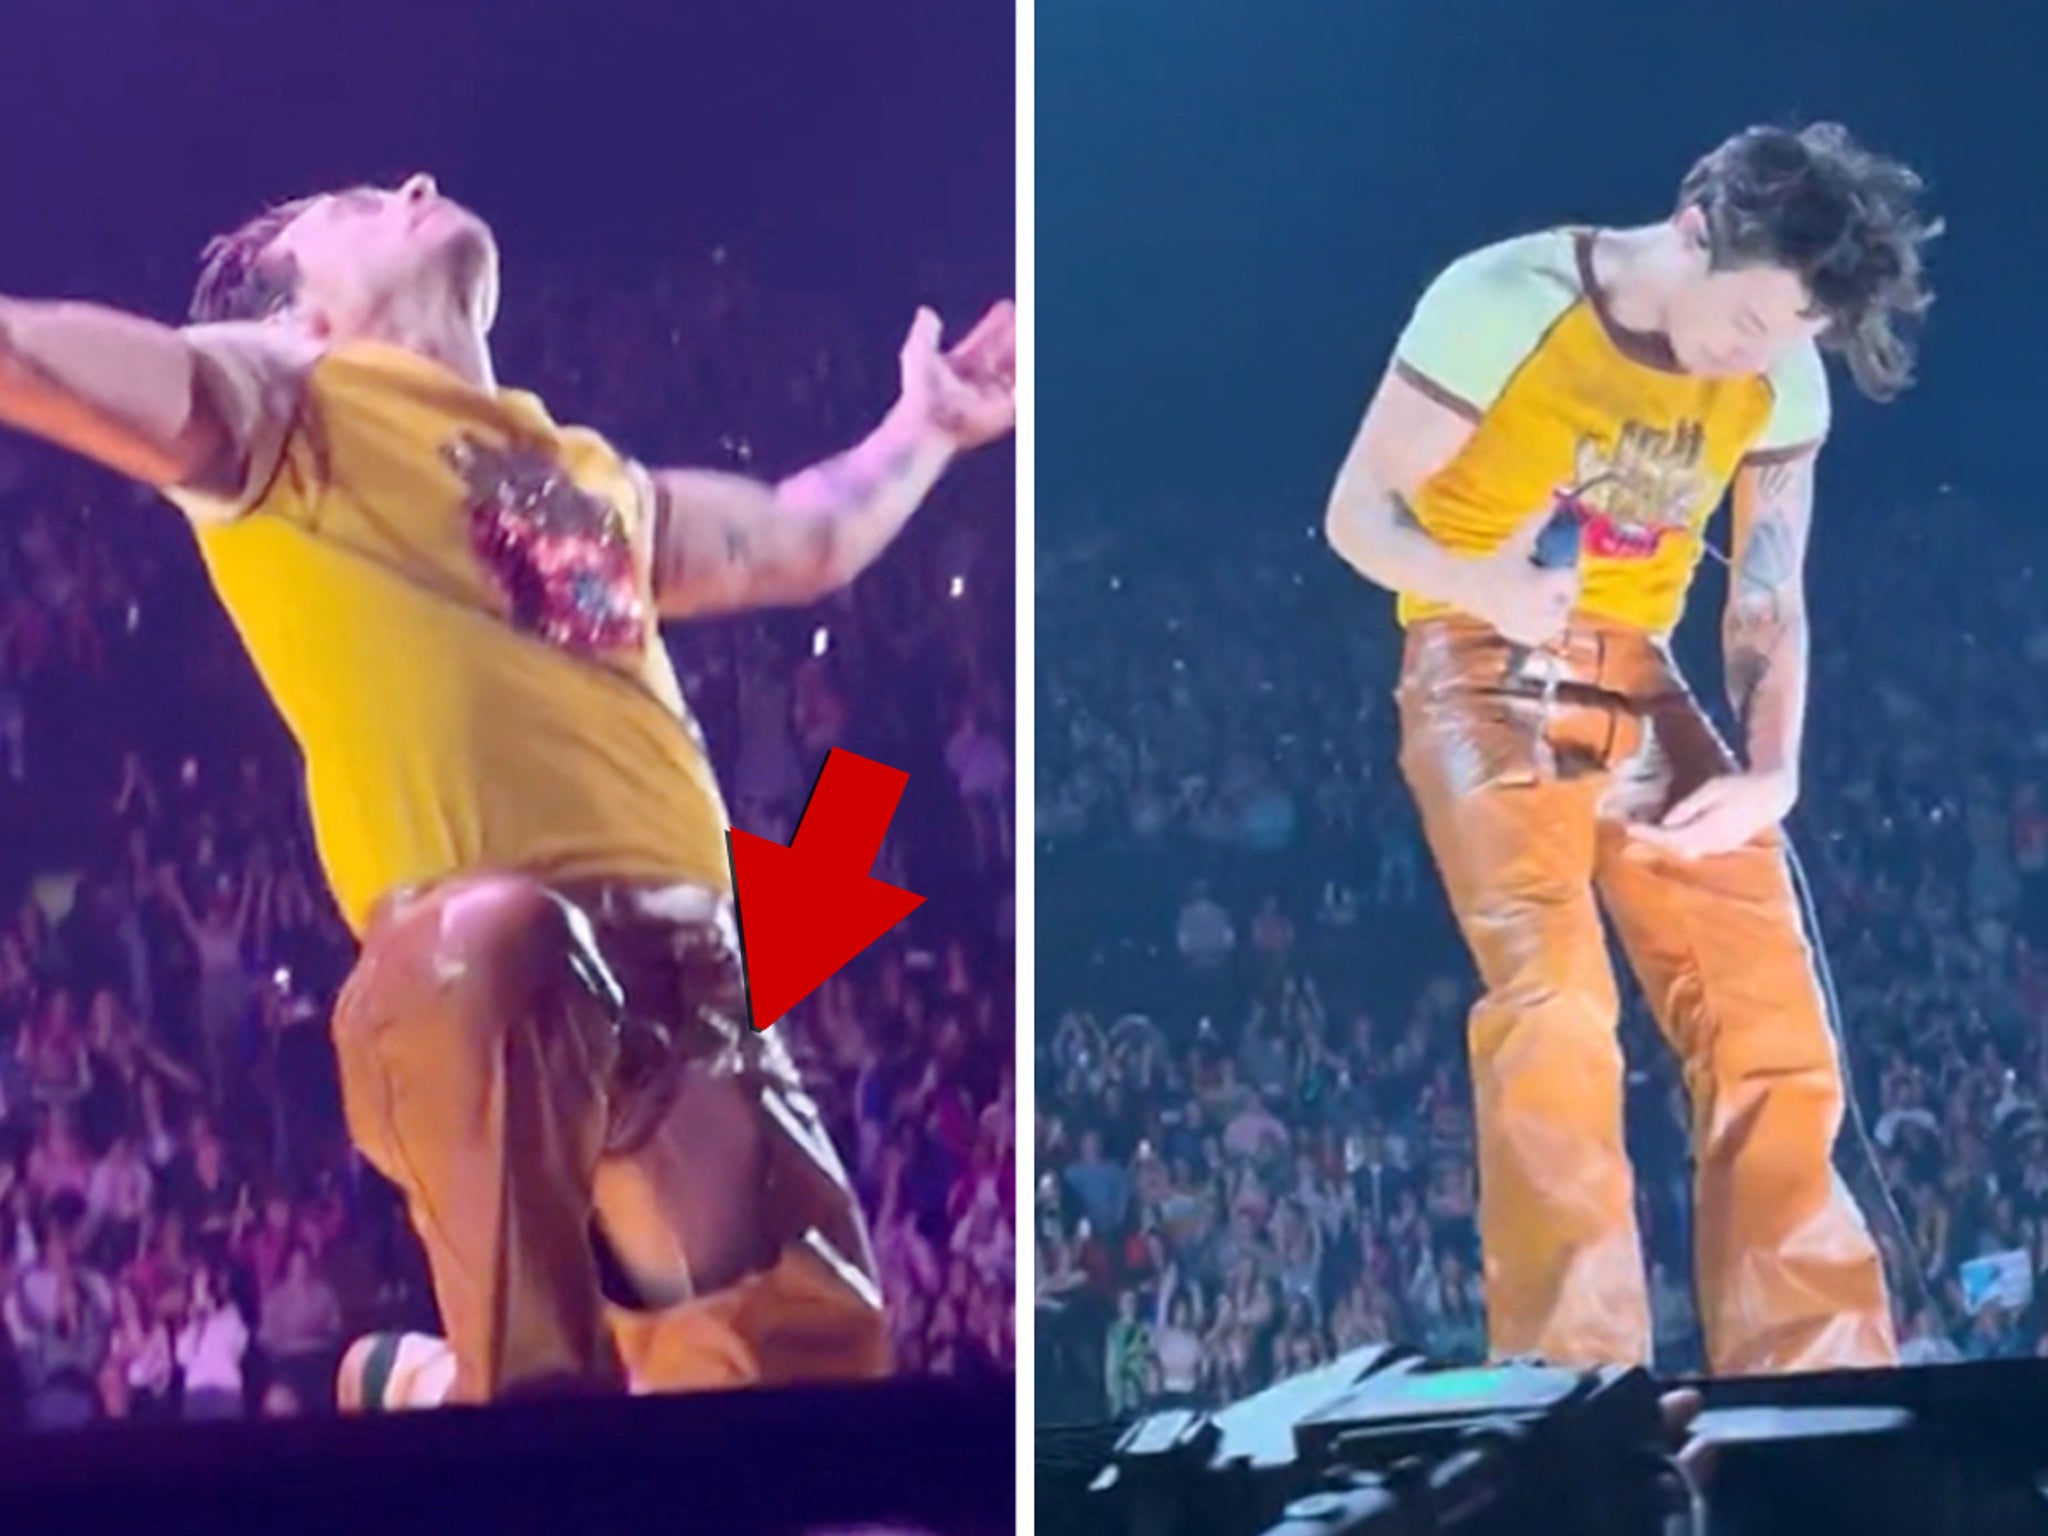 Harry Styles Rips Pants While Performing in Front of His Celeb Crush